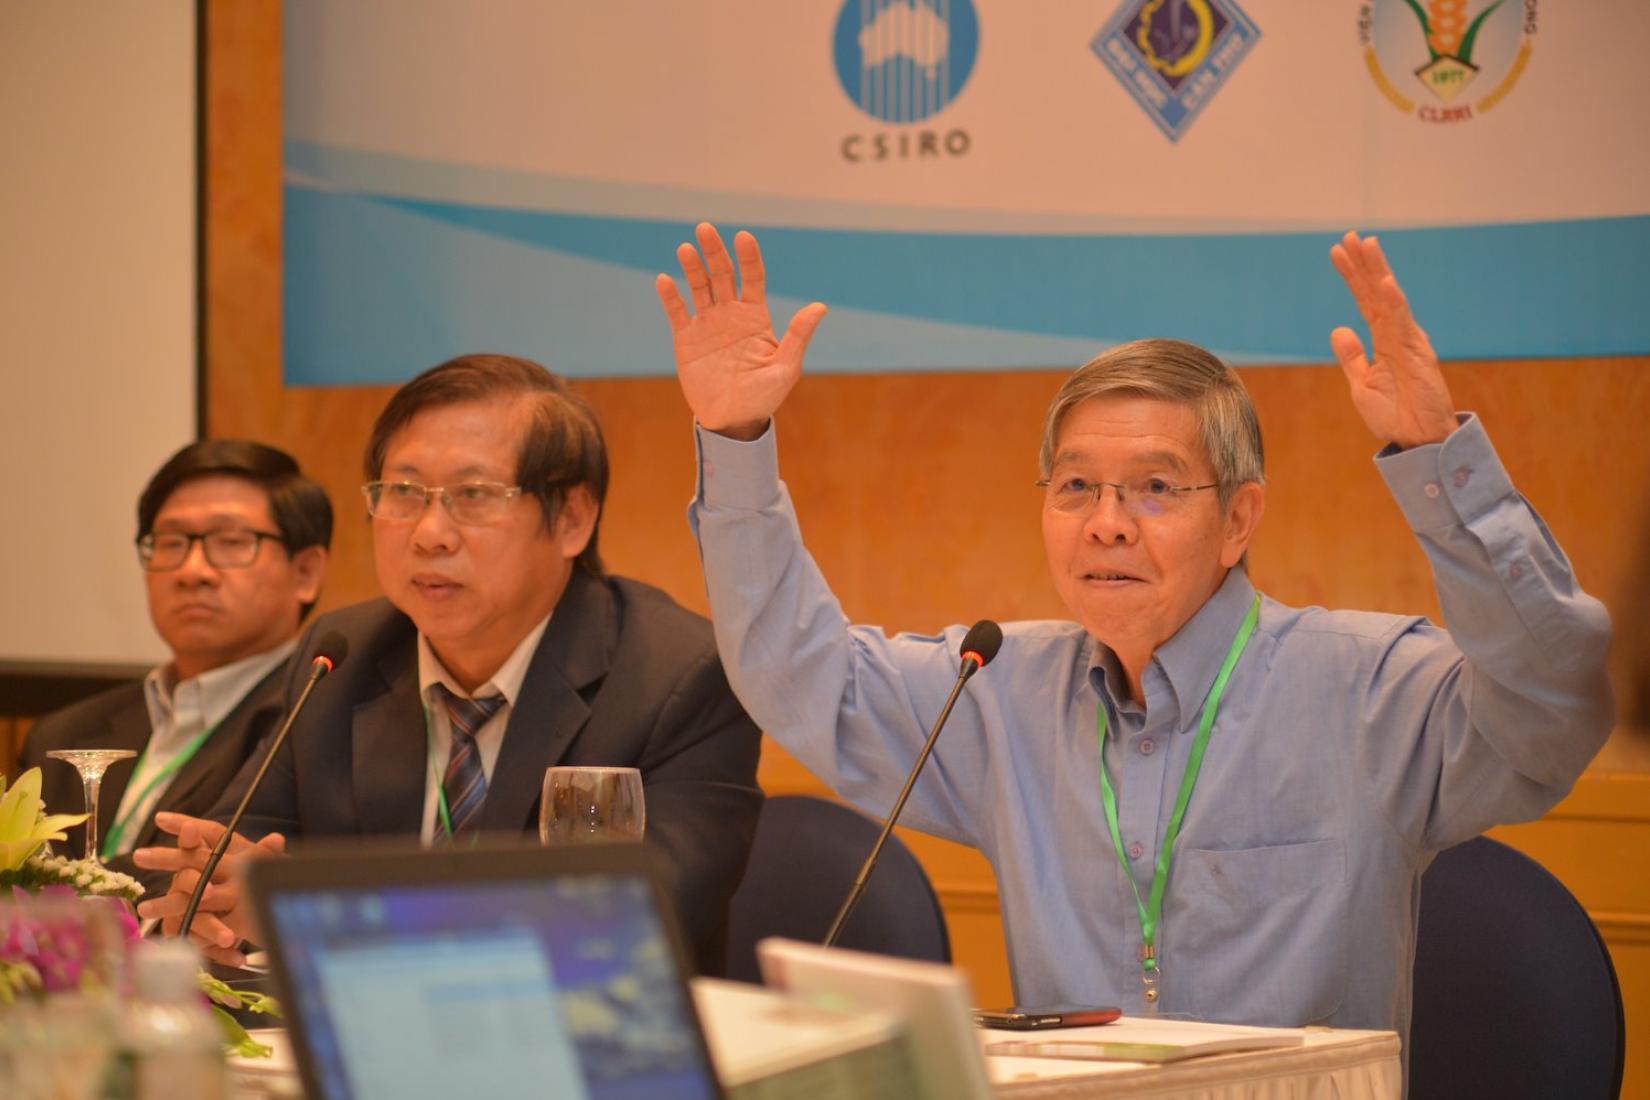 Three men in a conference room. One has both hands in the air